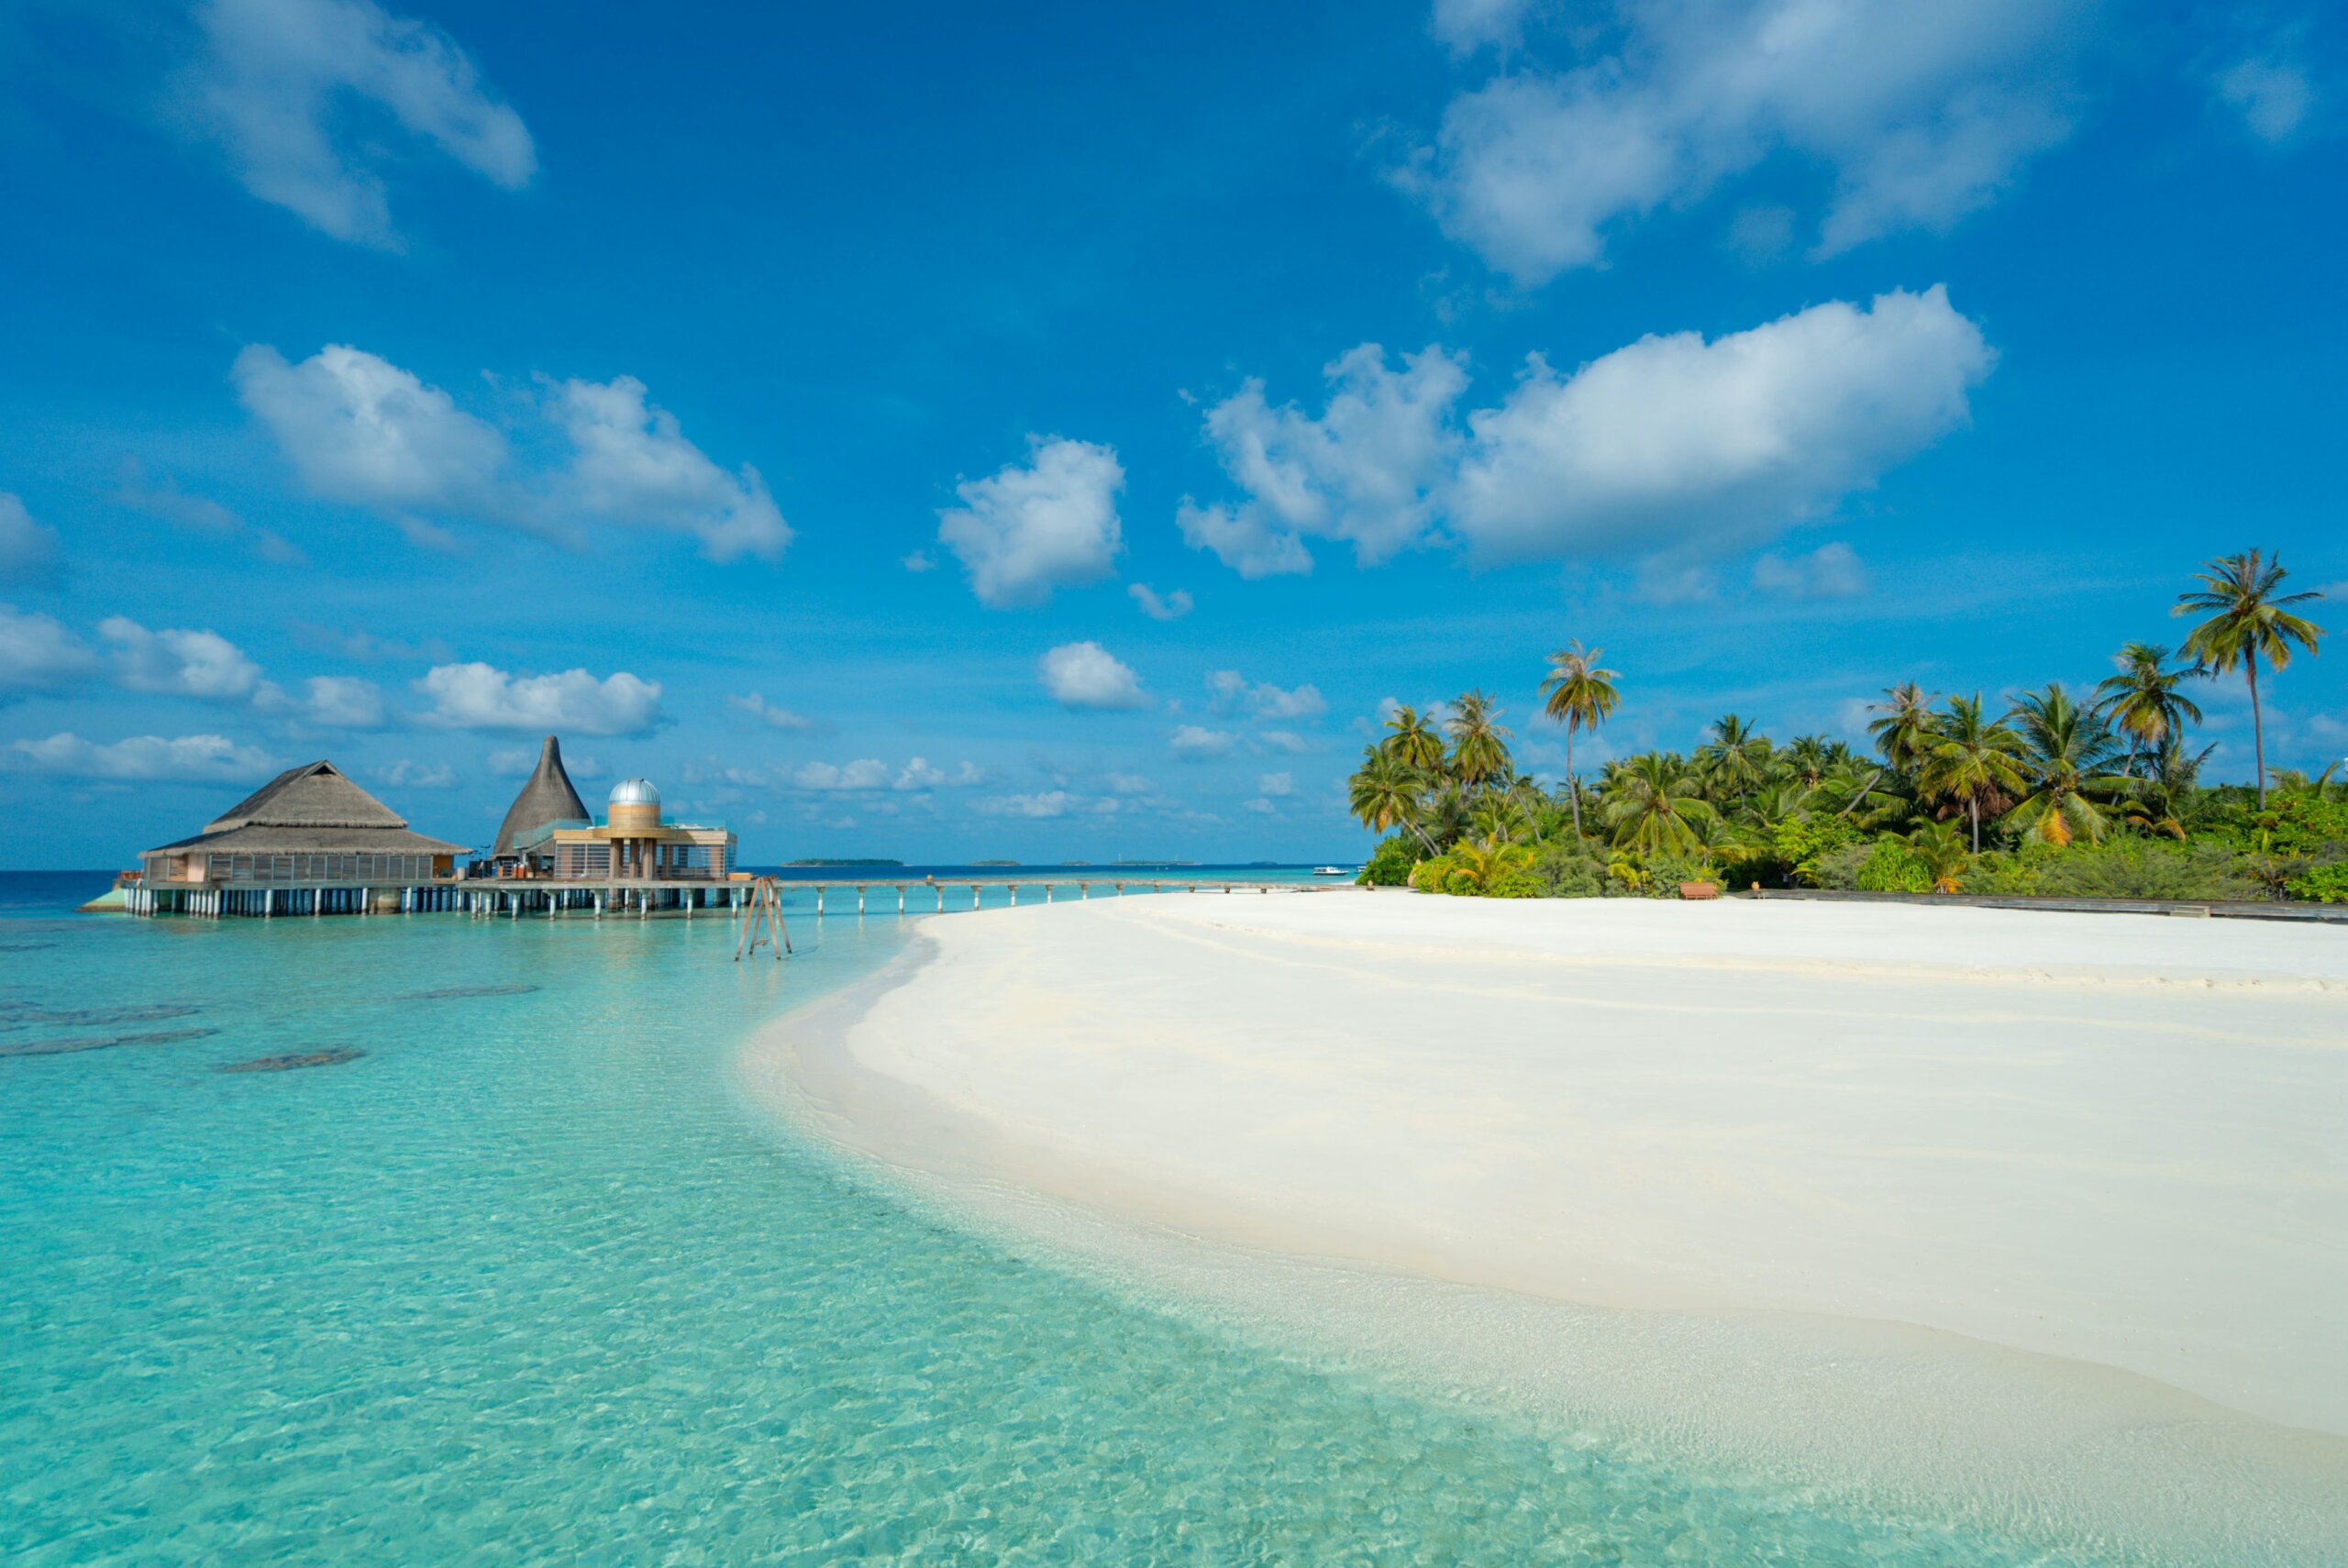 Overwater bungalow near white sand and turquoise water